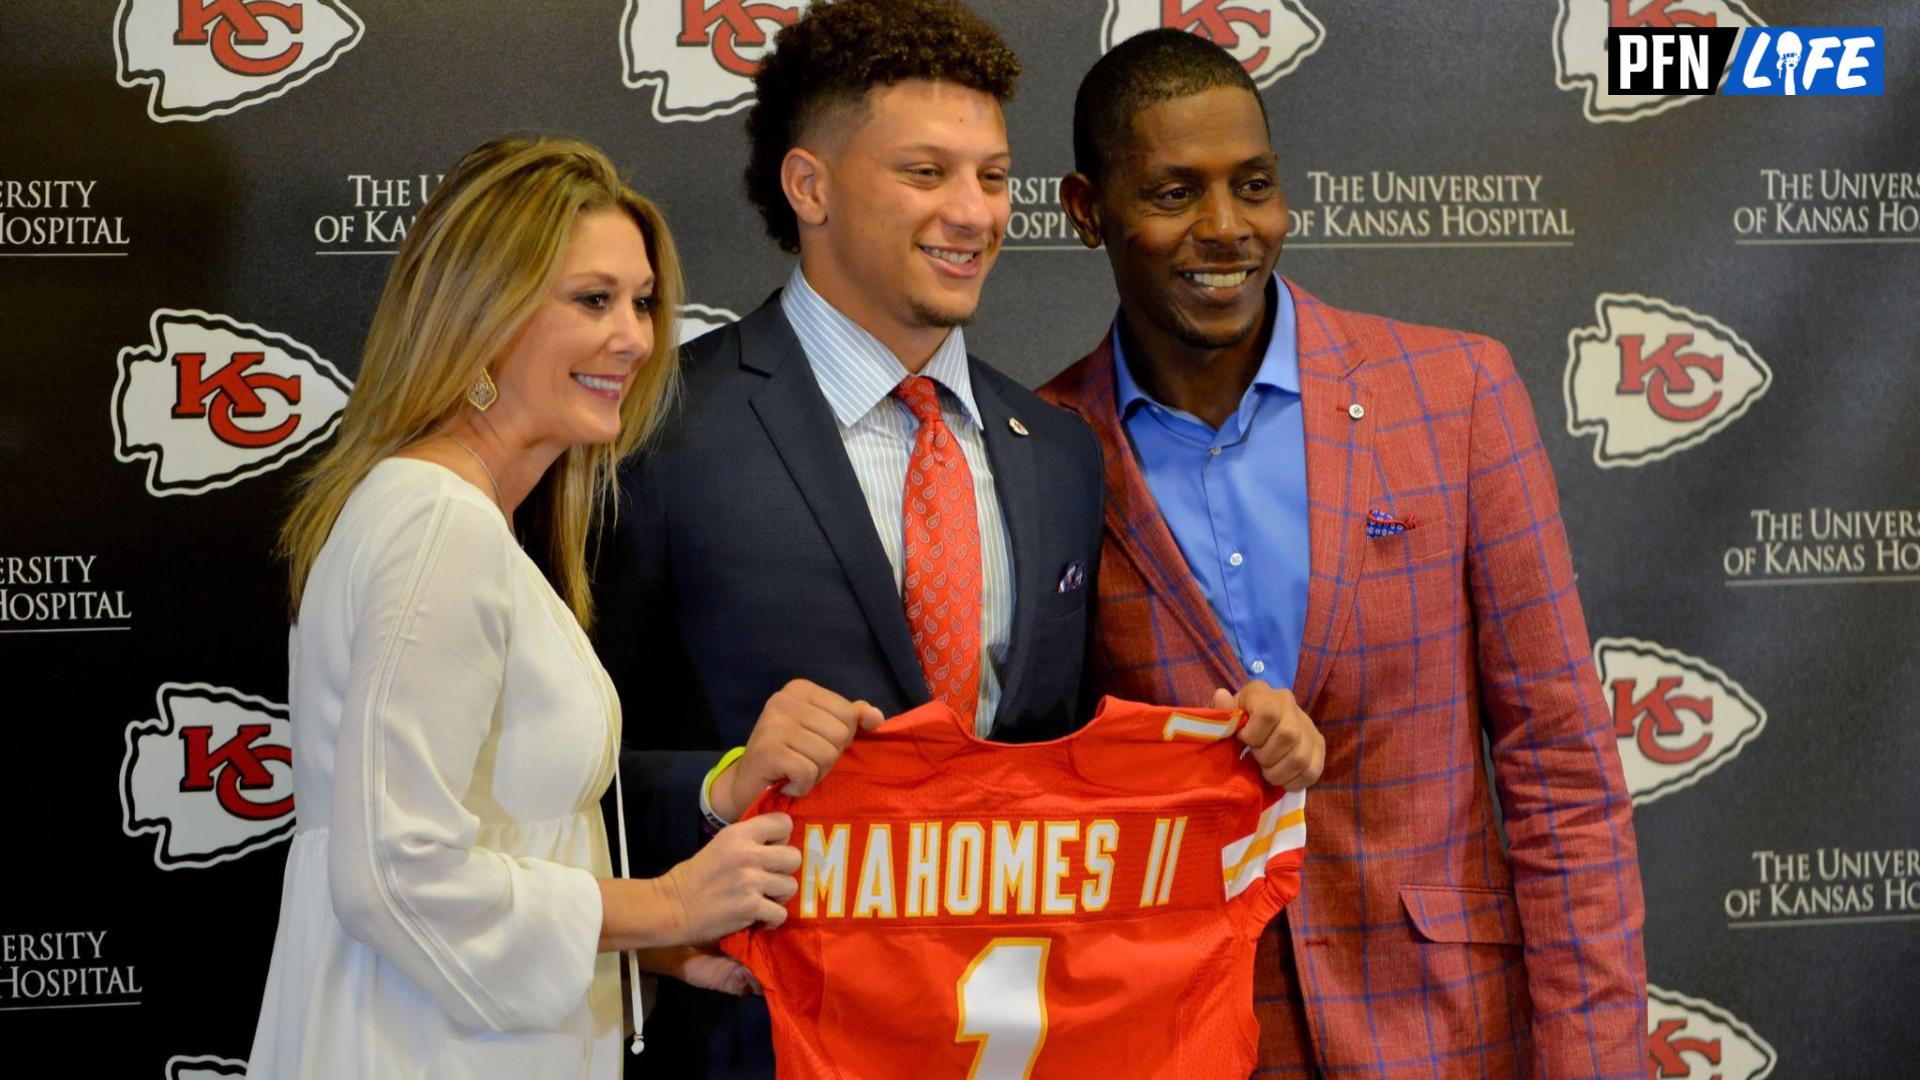 Kansas City Chiefs QB Patrick Mahomes poses with his parents after being drafted.